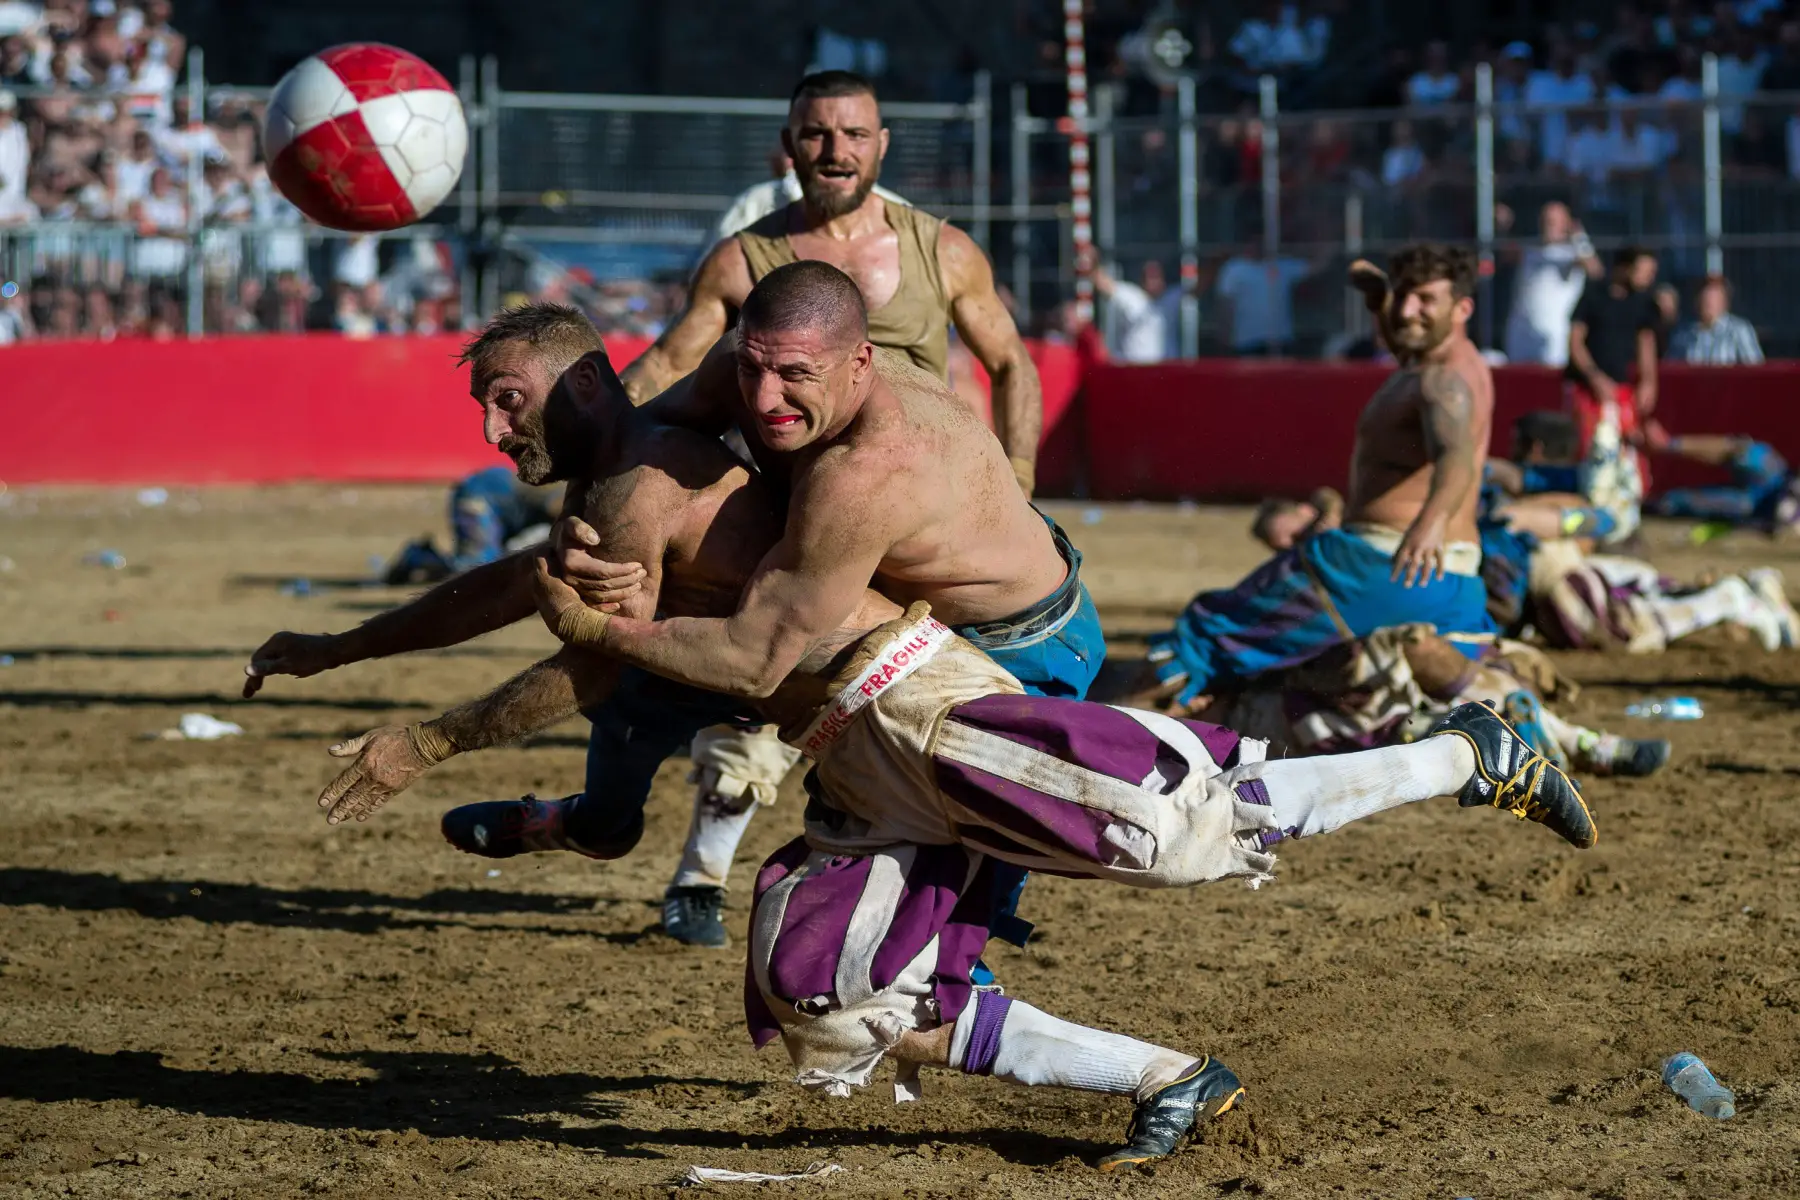 Players tackling each other at the Calcio Storico Fiorentino ancient football games